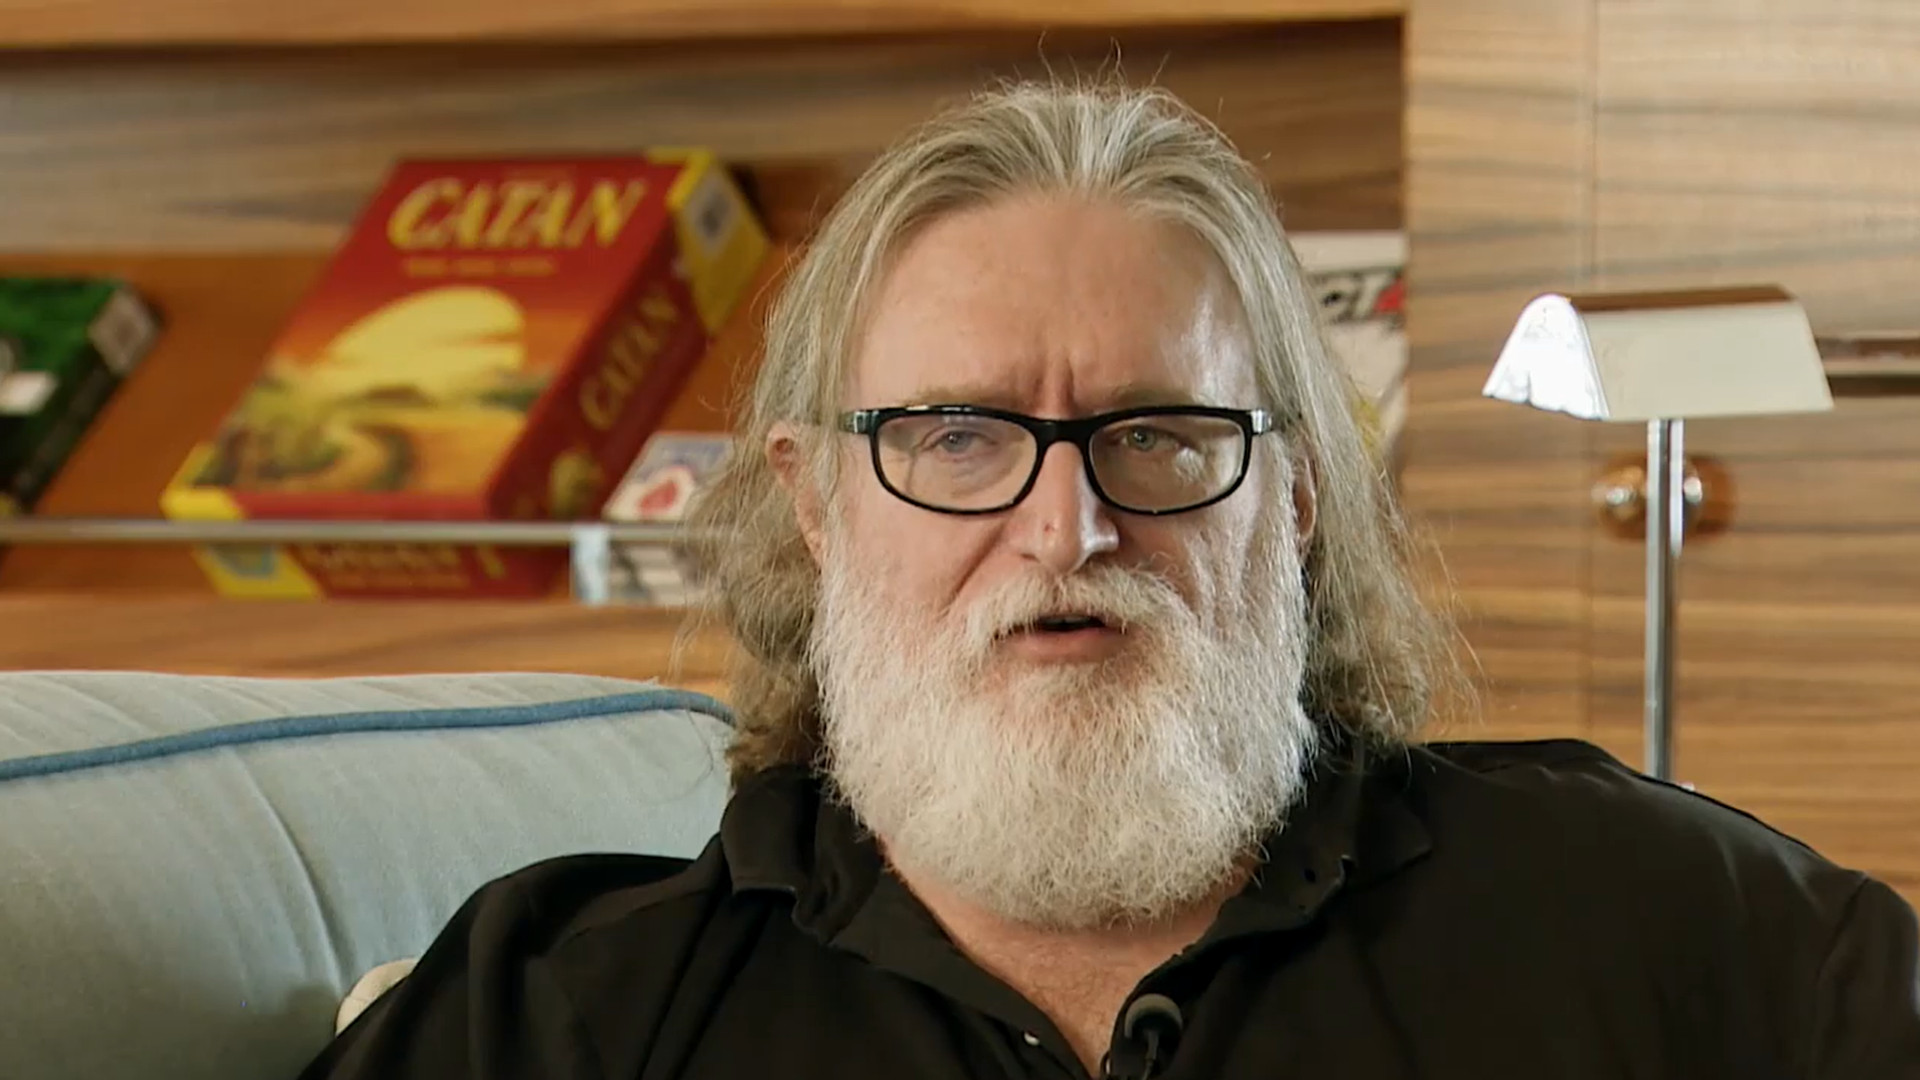 Gabe Newell wants to move beyond “meat peripherals” and give your